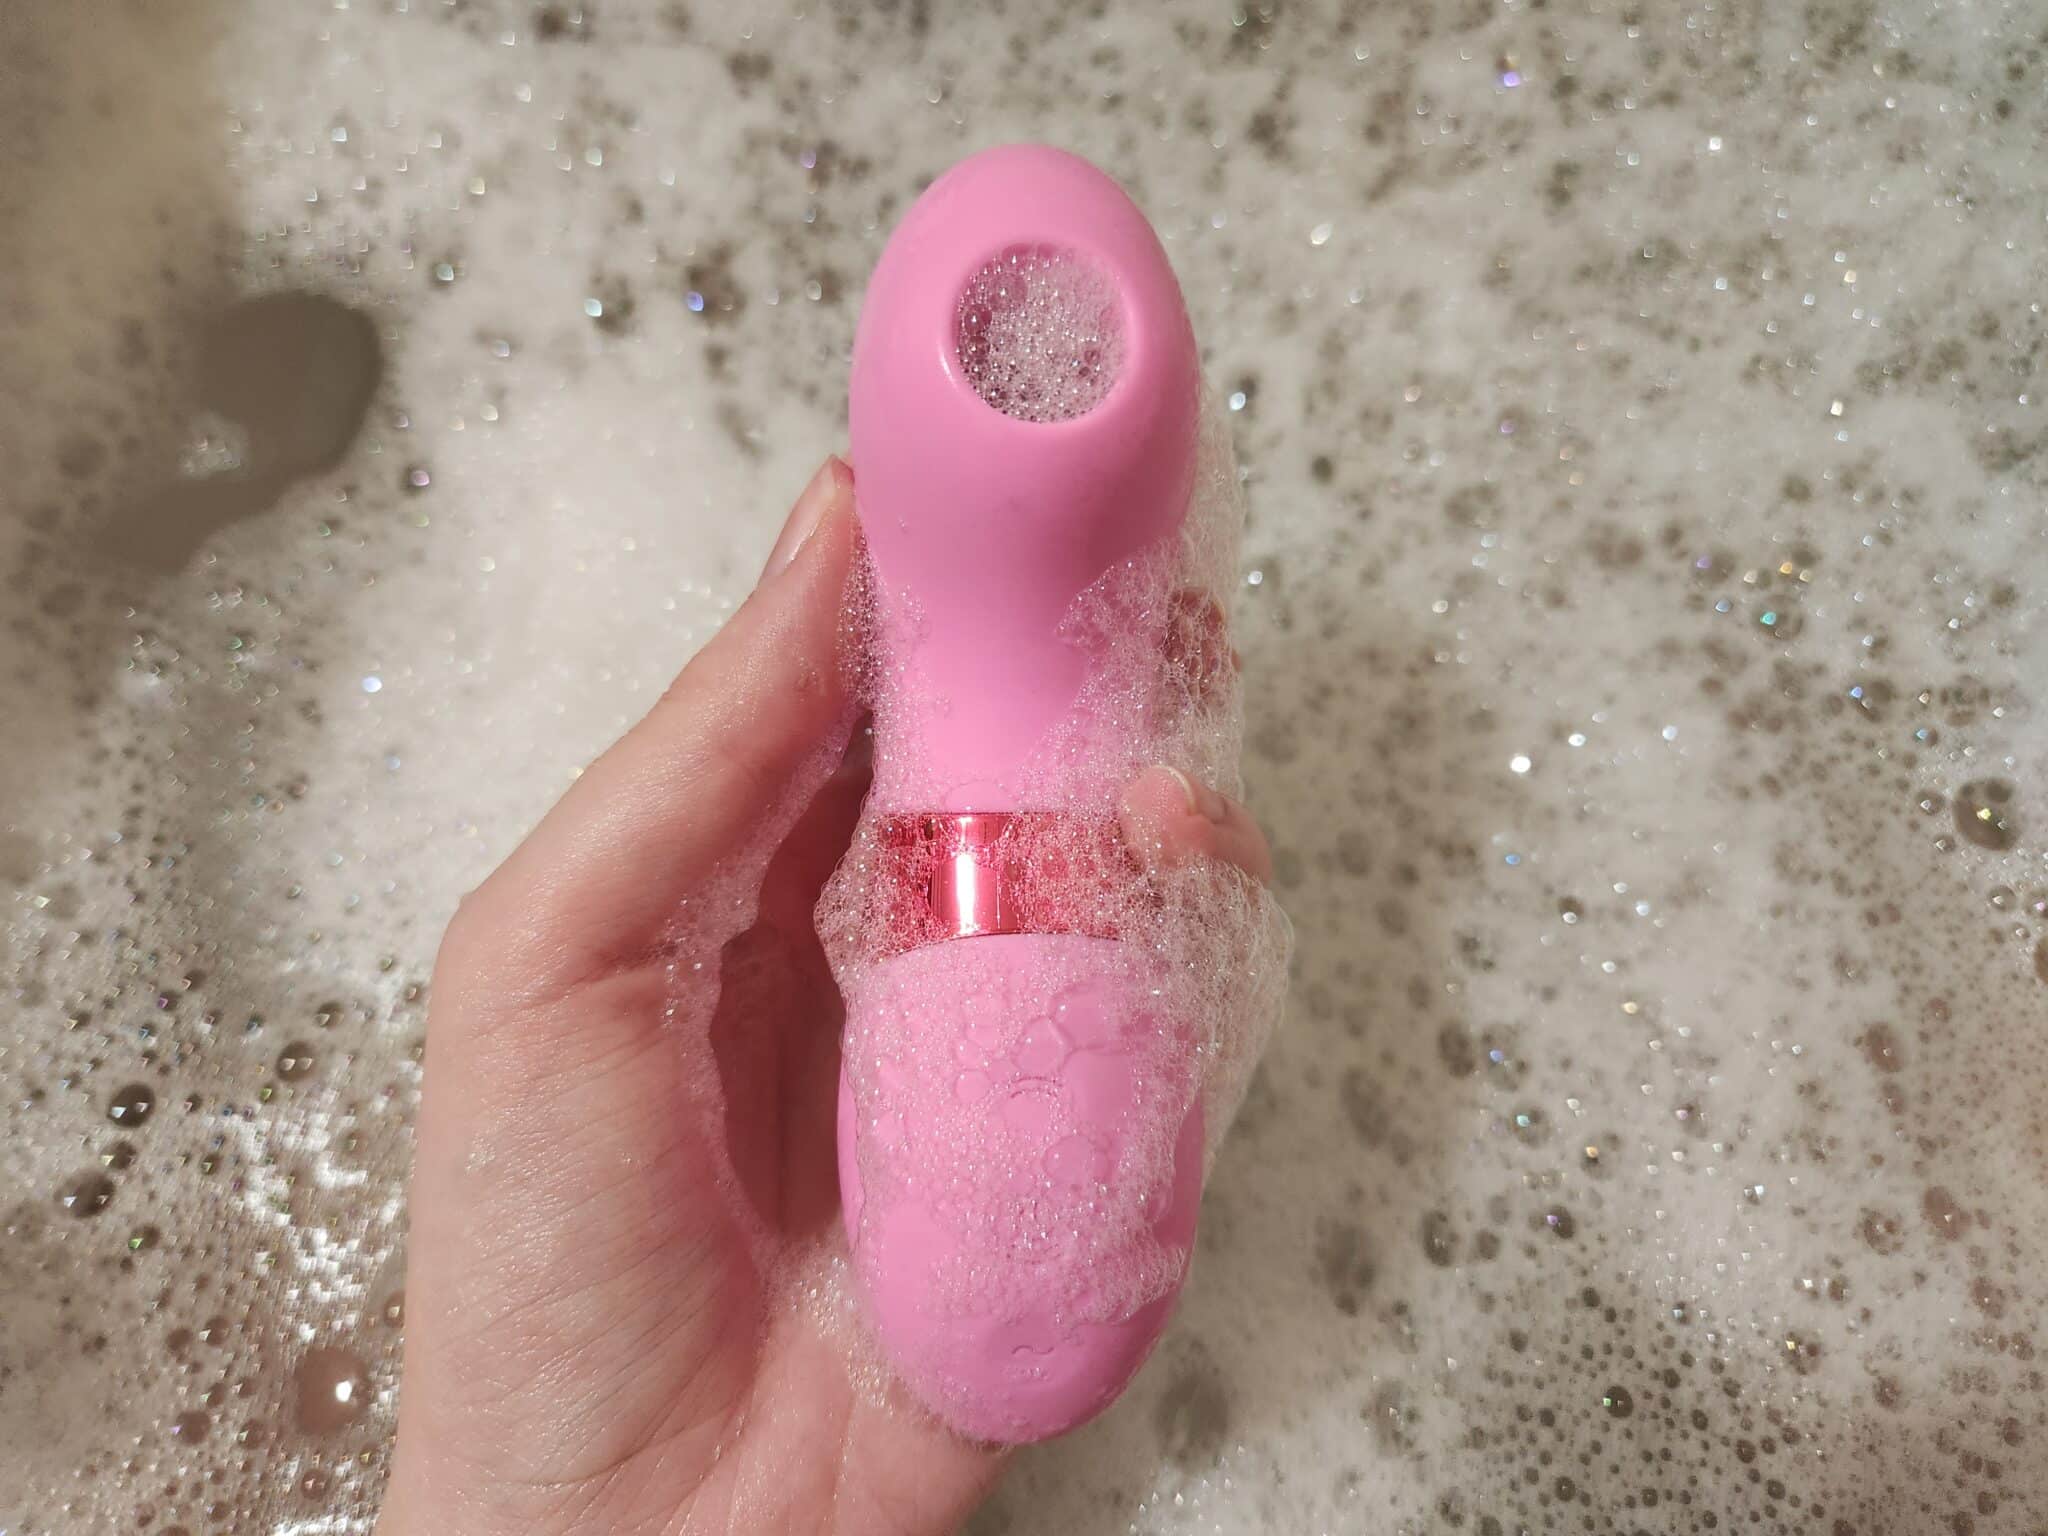 Satisfyer Breathless The Satisfyer Breathless’s Material and Care